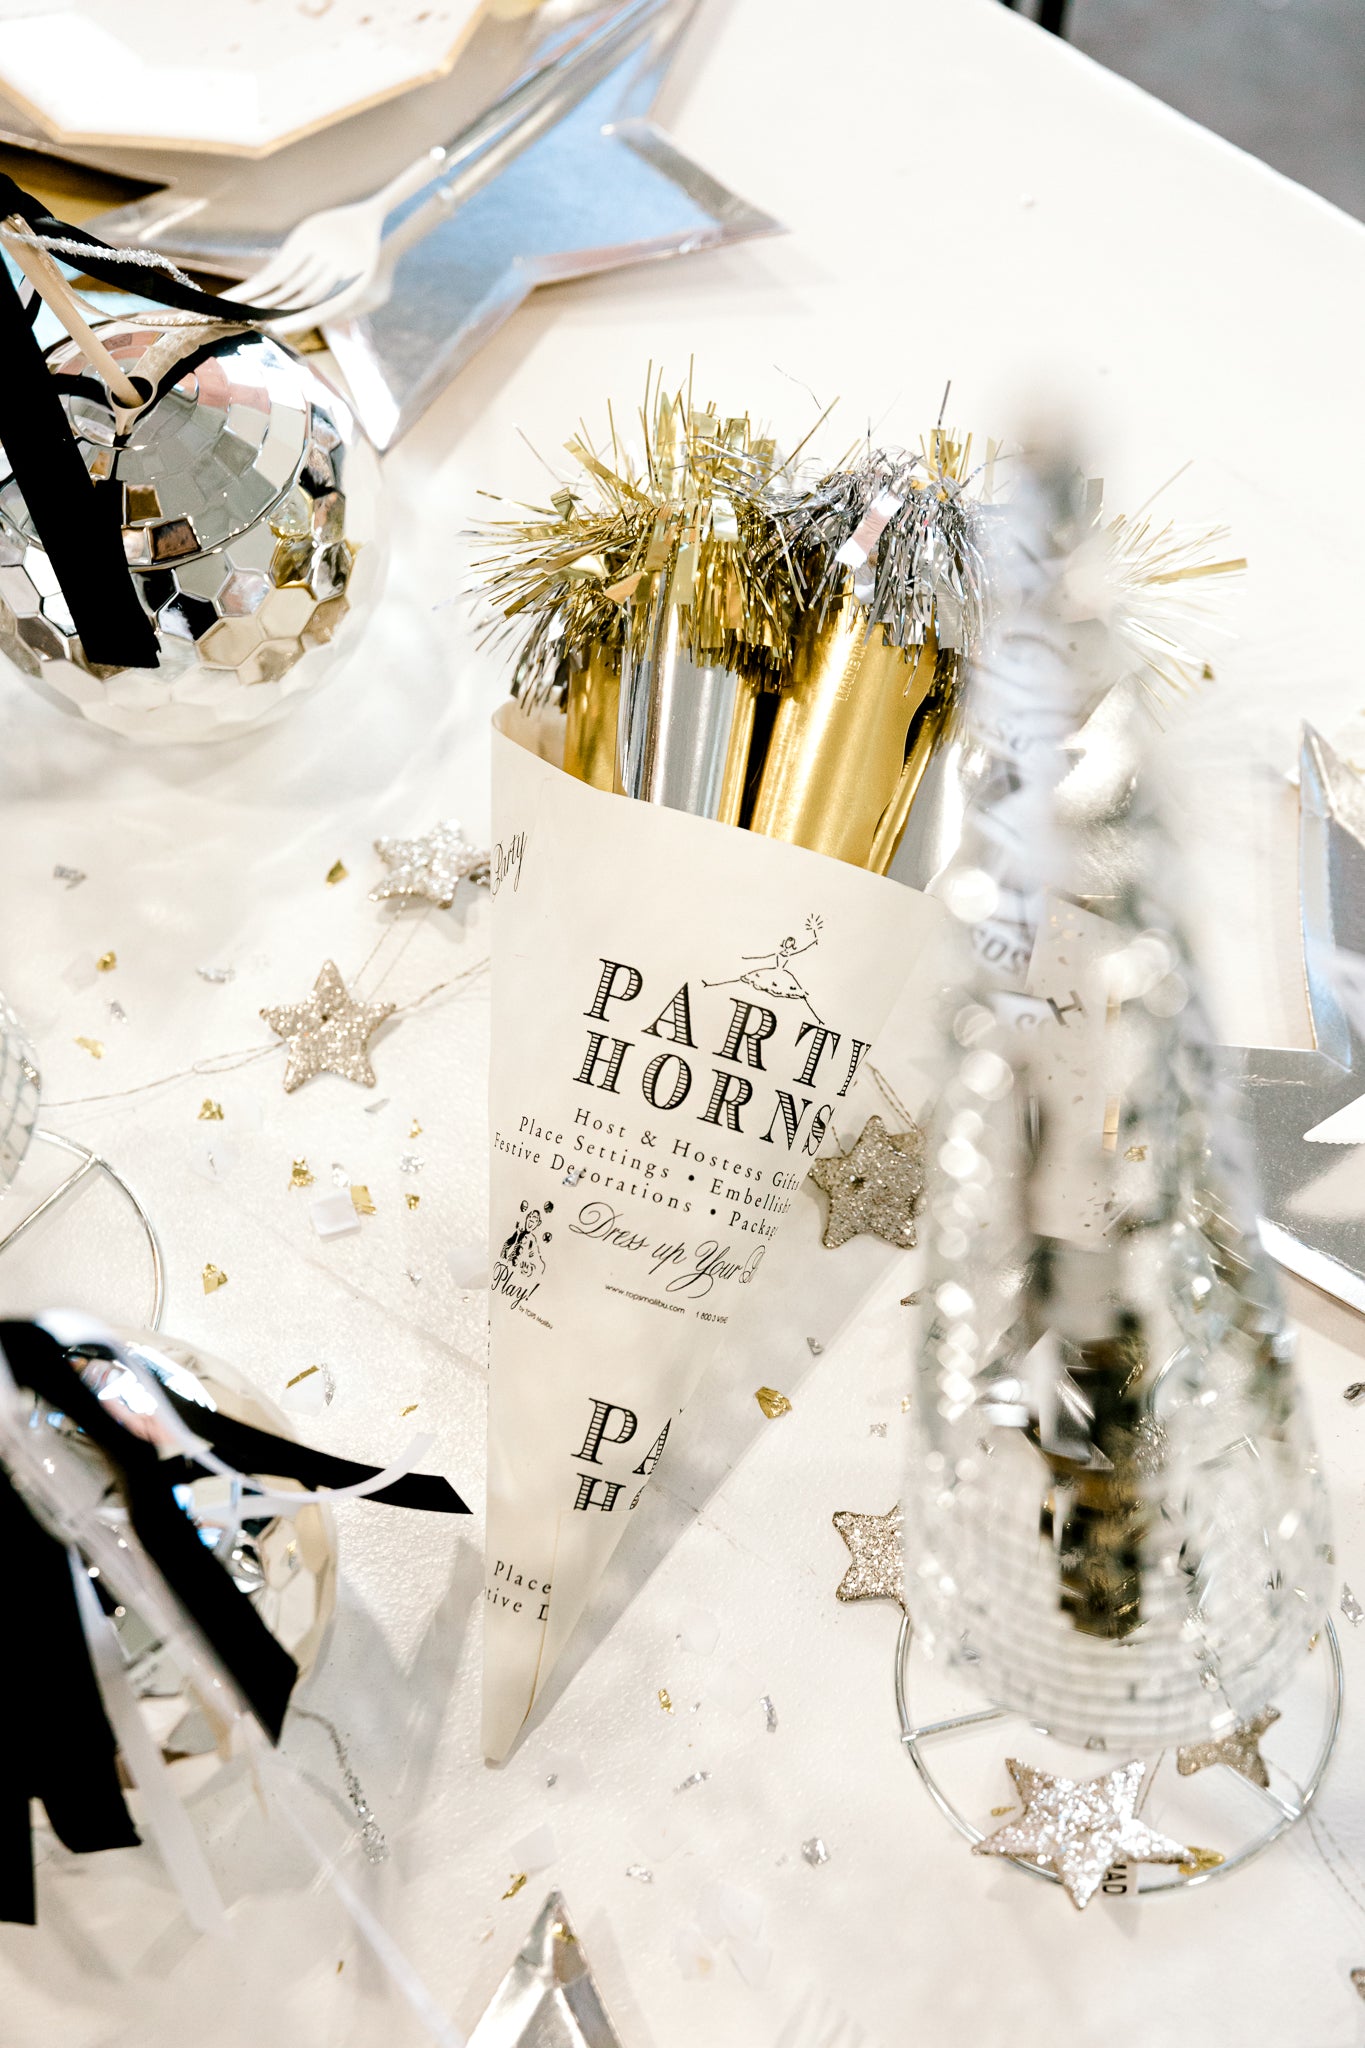 New Years Eve party favors